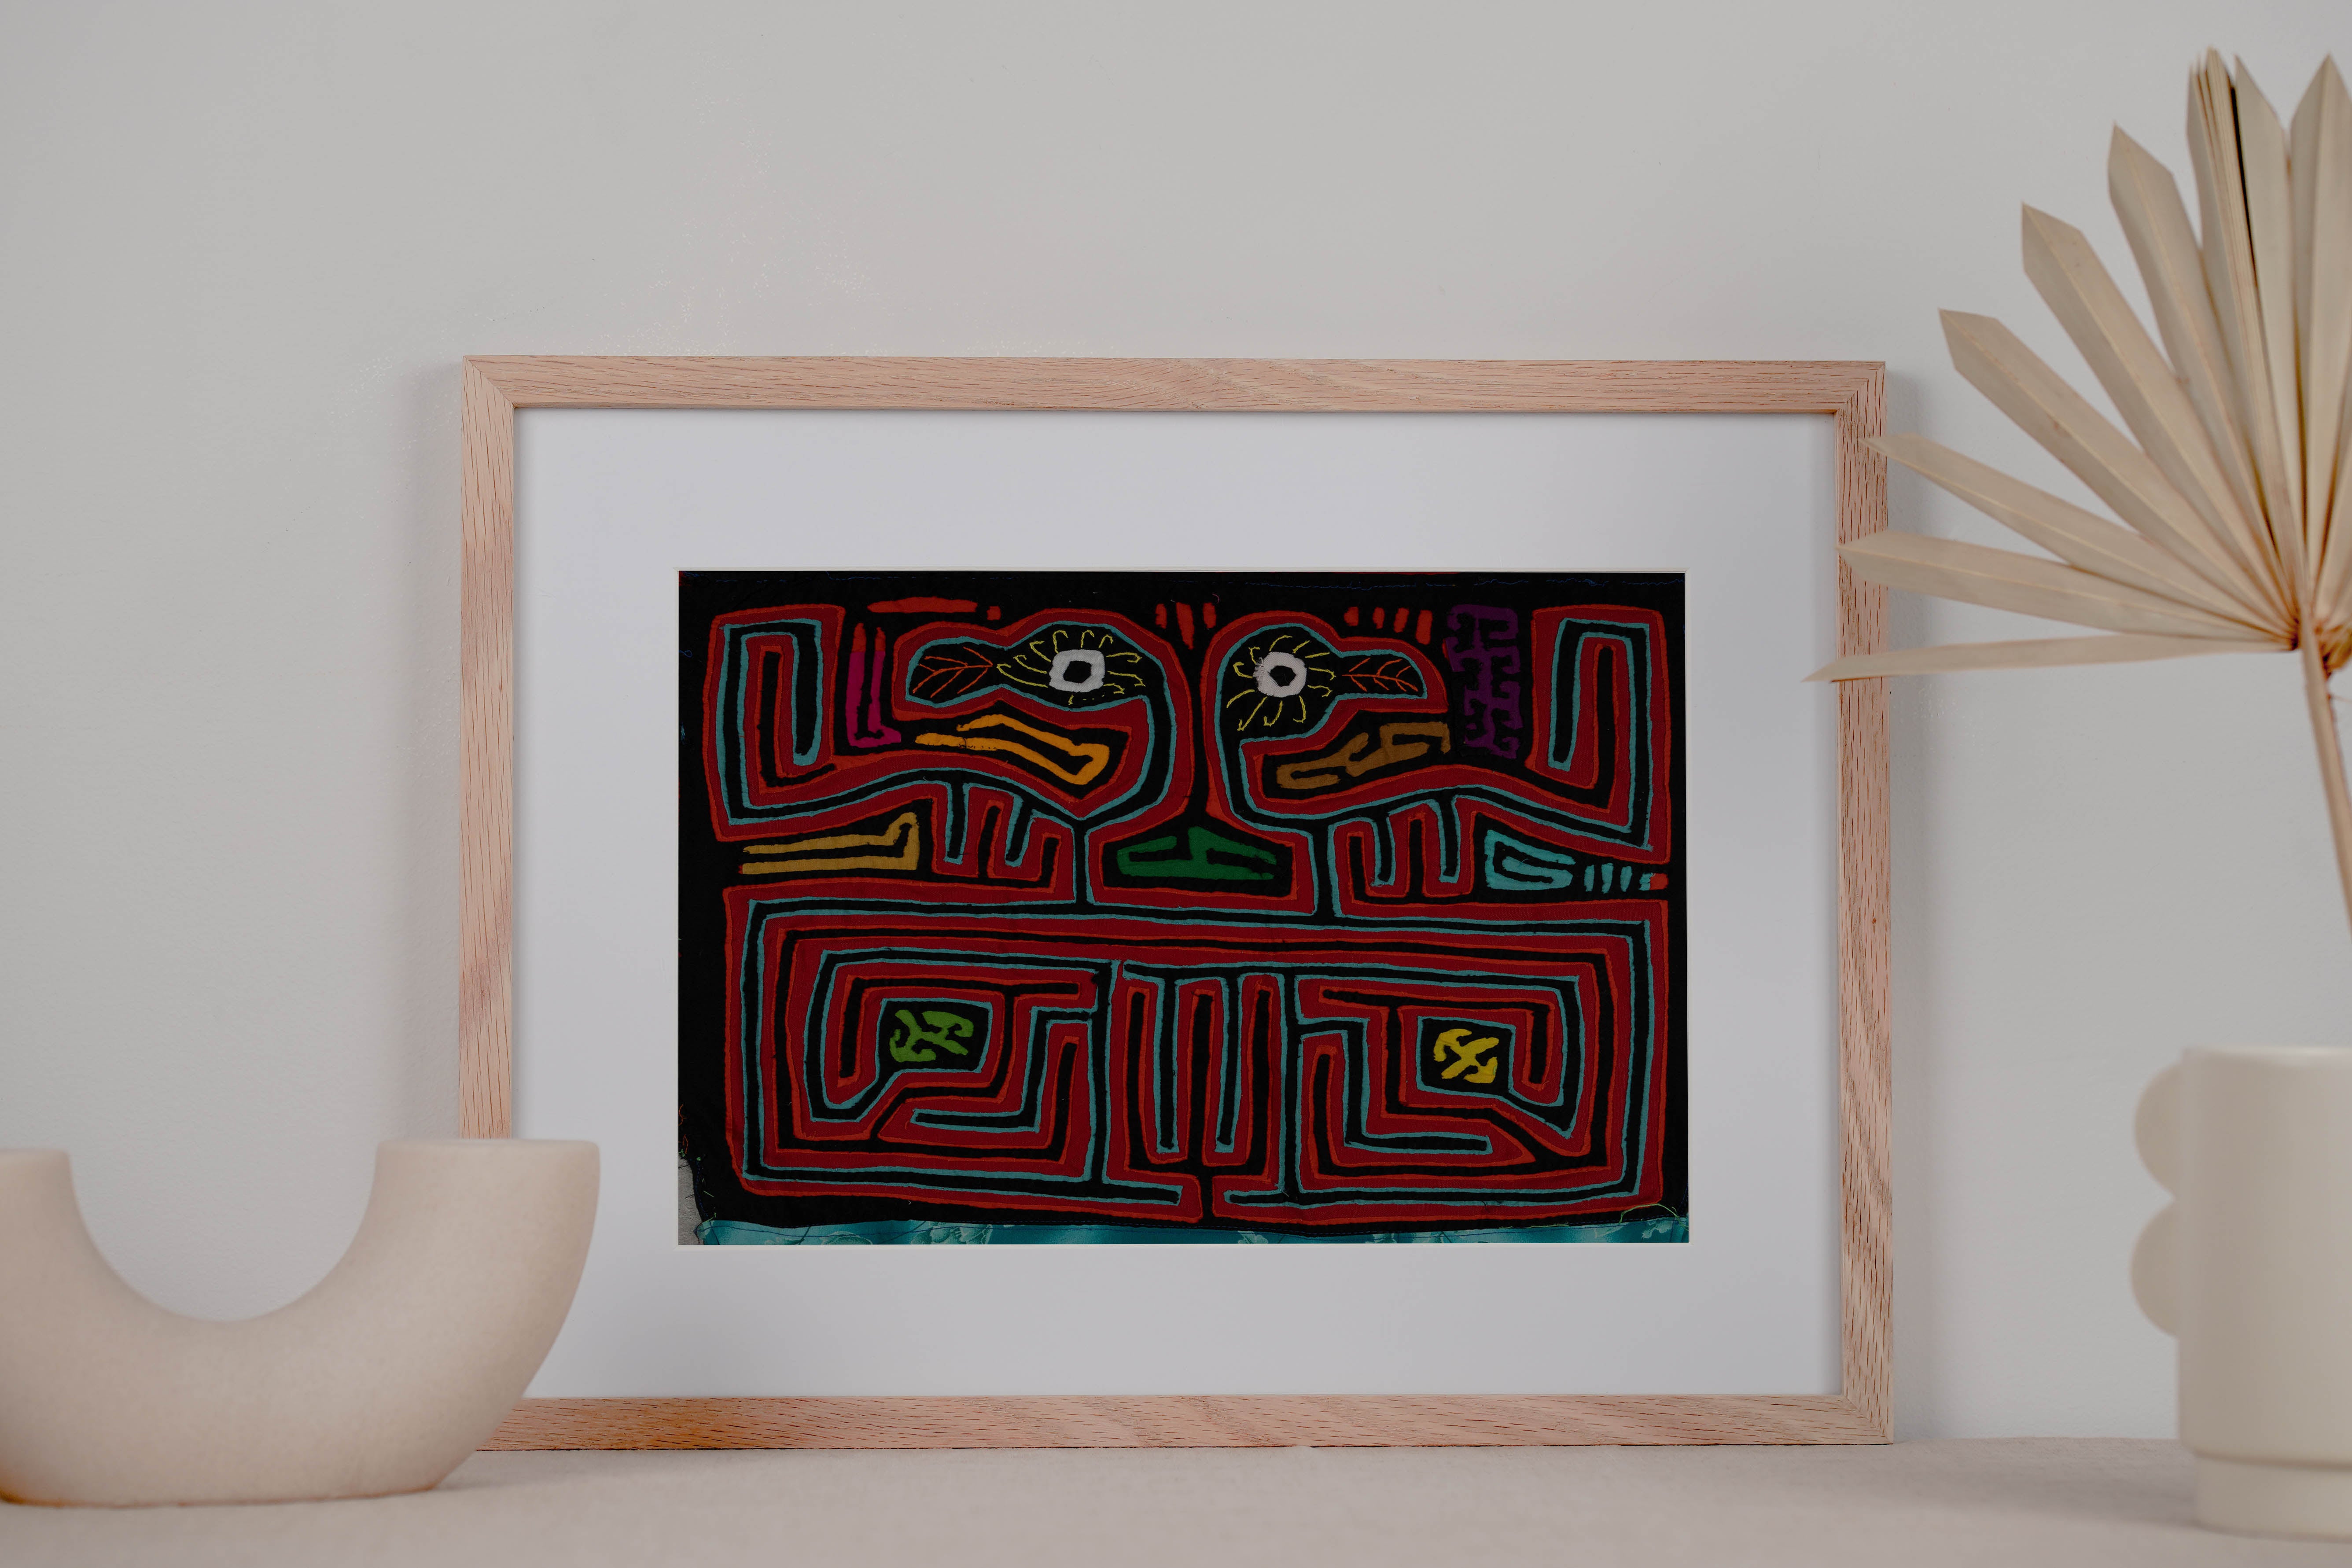 Red And Turquoise Former Kuna Blouse Mola